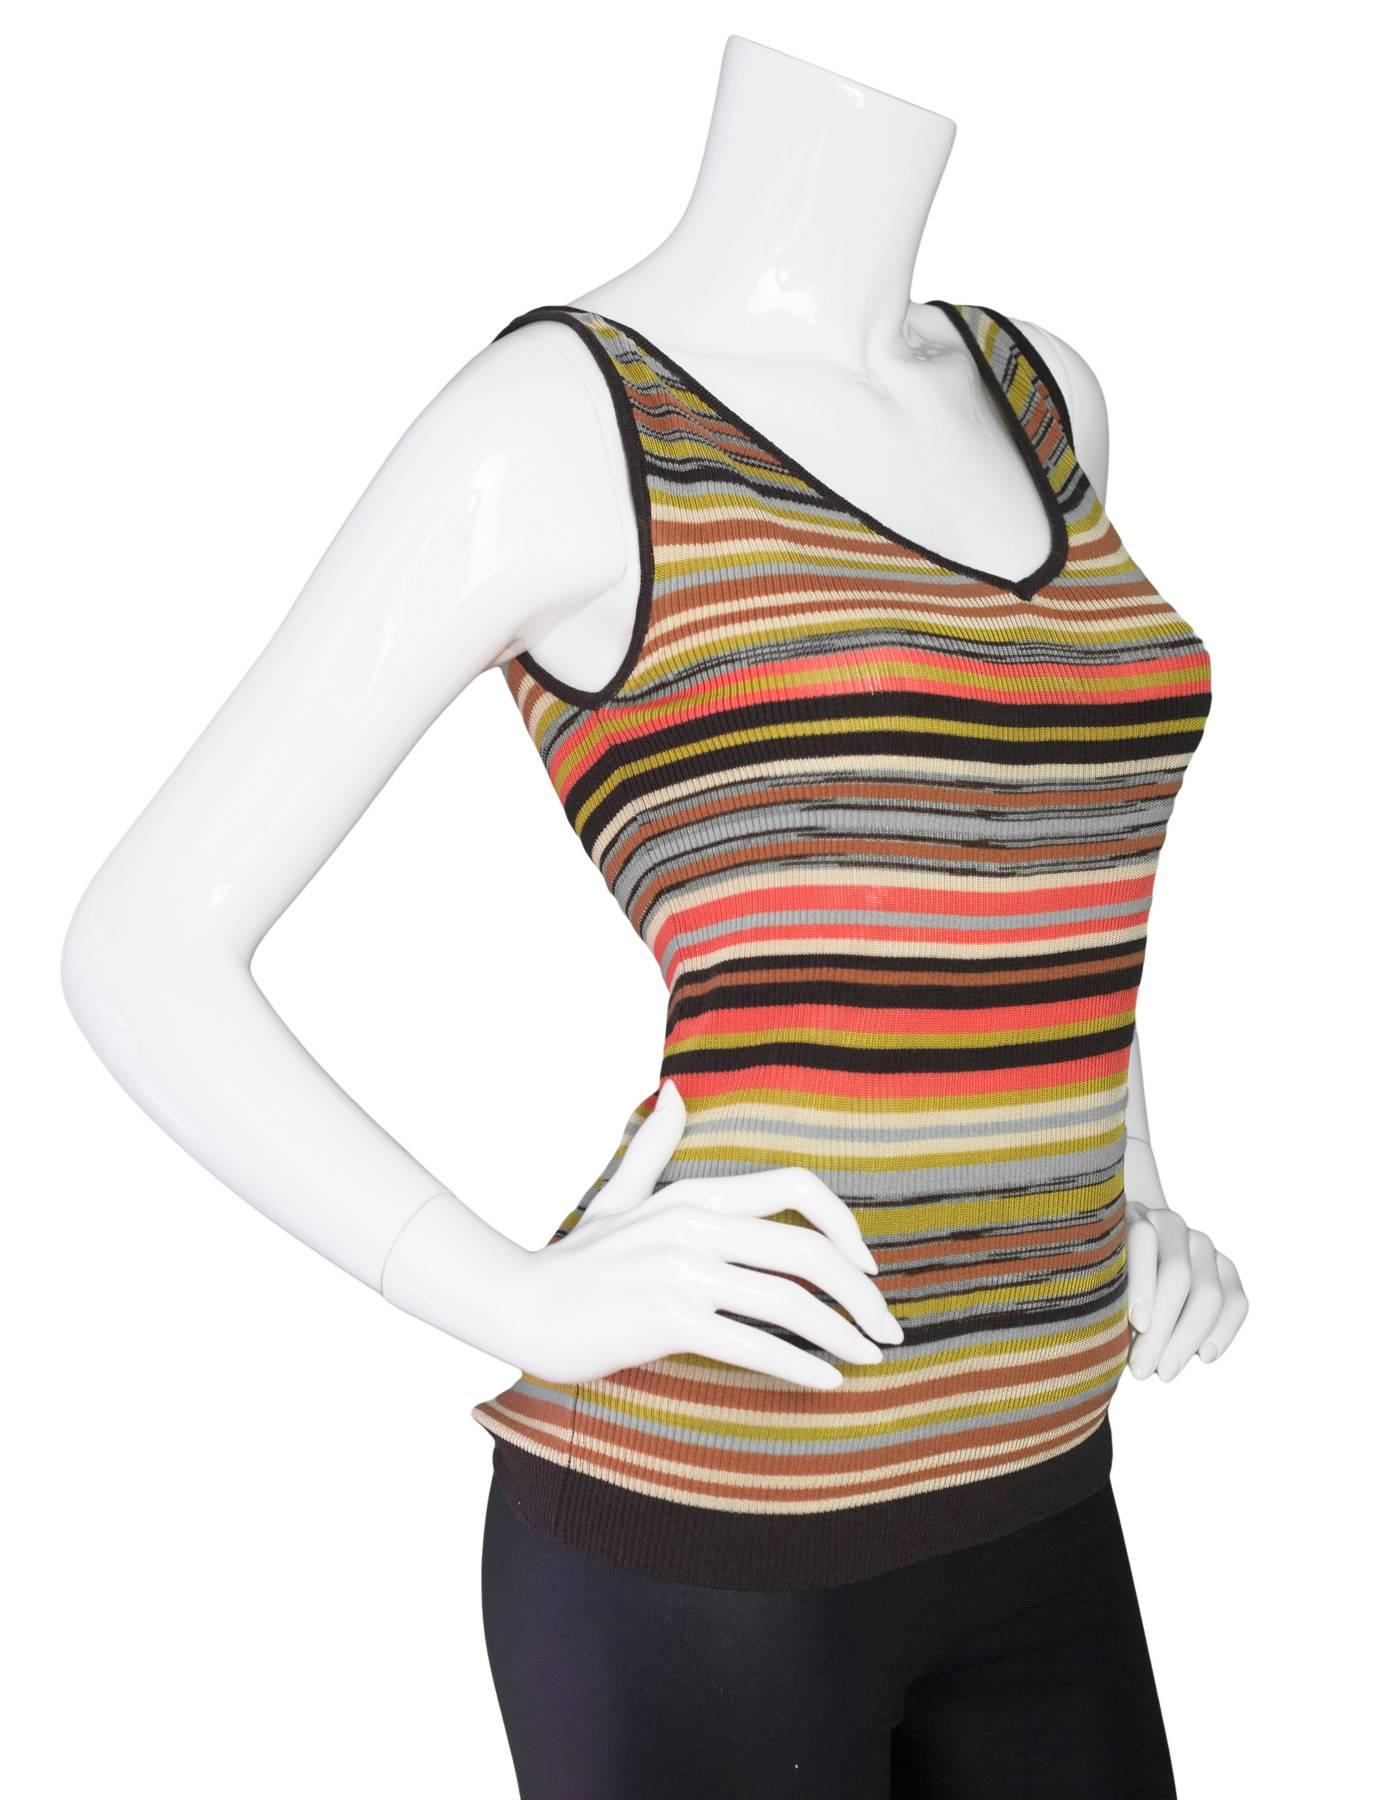 M Missoni Multi-Color V-Neck Top Sz 40

Made In: Italy
Color: Brown, orange, green
Lining: None
Closure/Opening: Pull over
Exterior Pockets: None
Interior Pockets: None
Overall Condition: Excellent pre-owned condition with the exception of some